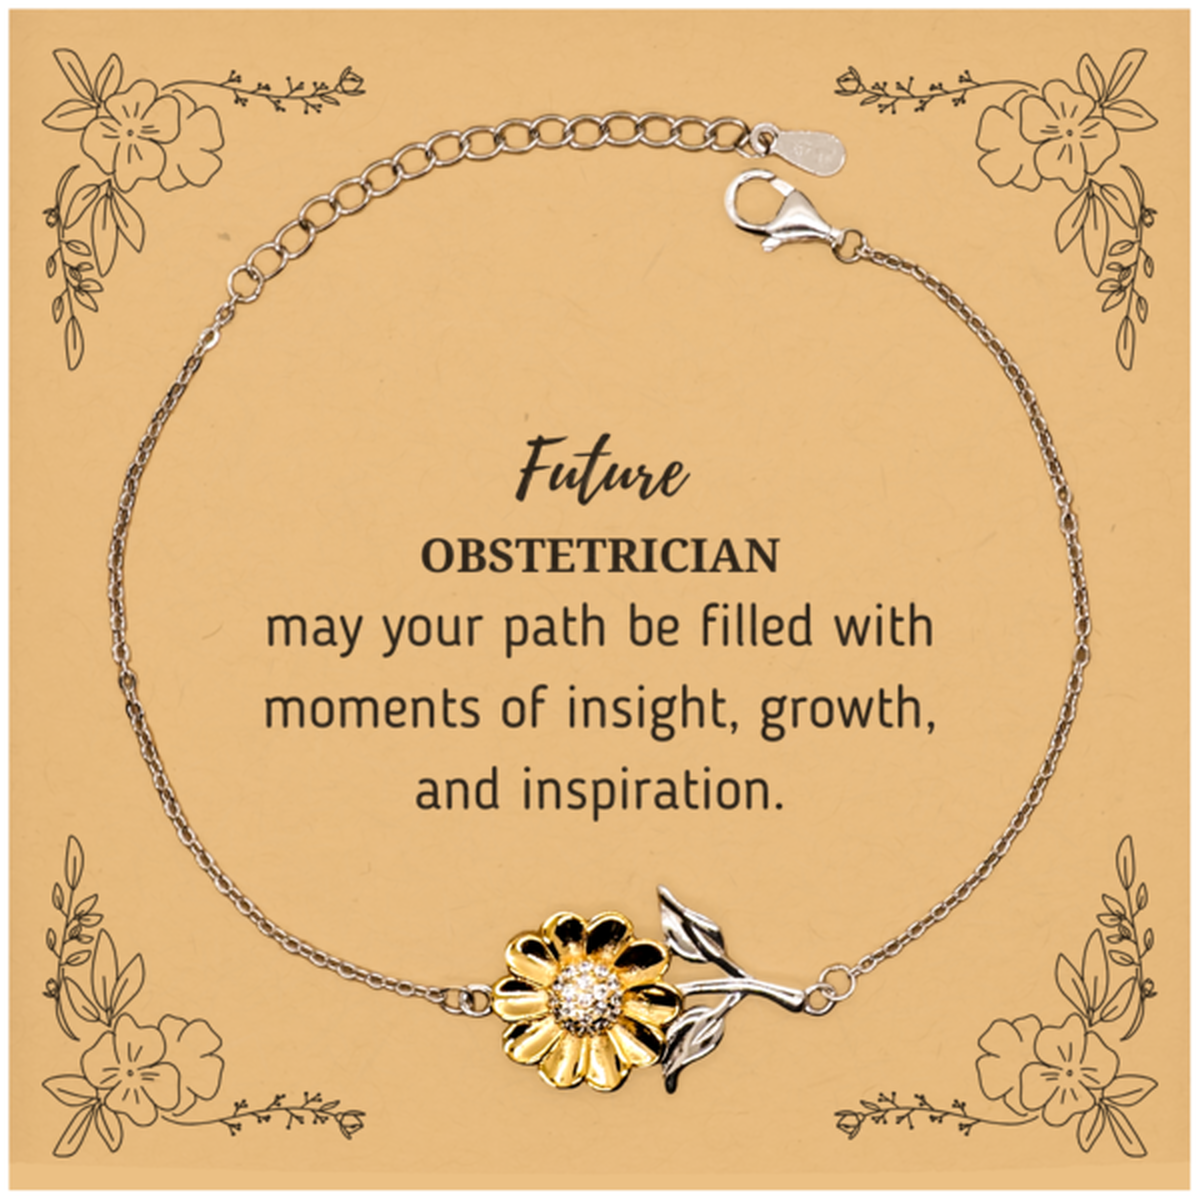 Future Obstetrician Gifts, May your path be filled with moments of insight, Graduation Gifts for New Obstetrician, Christmas Unique Sunflower Bracelet For Men, Women, Friends